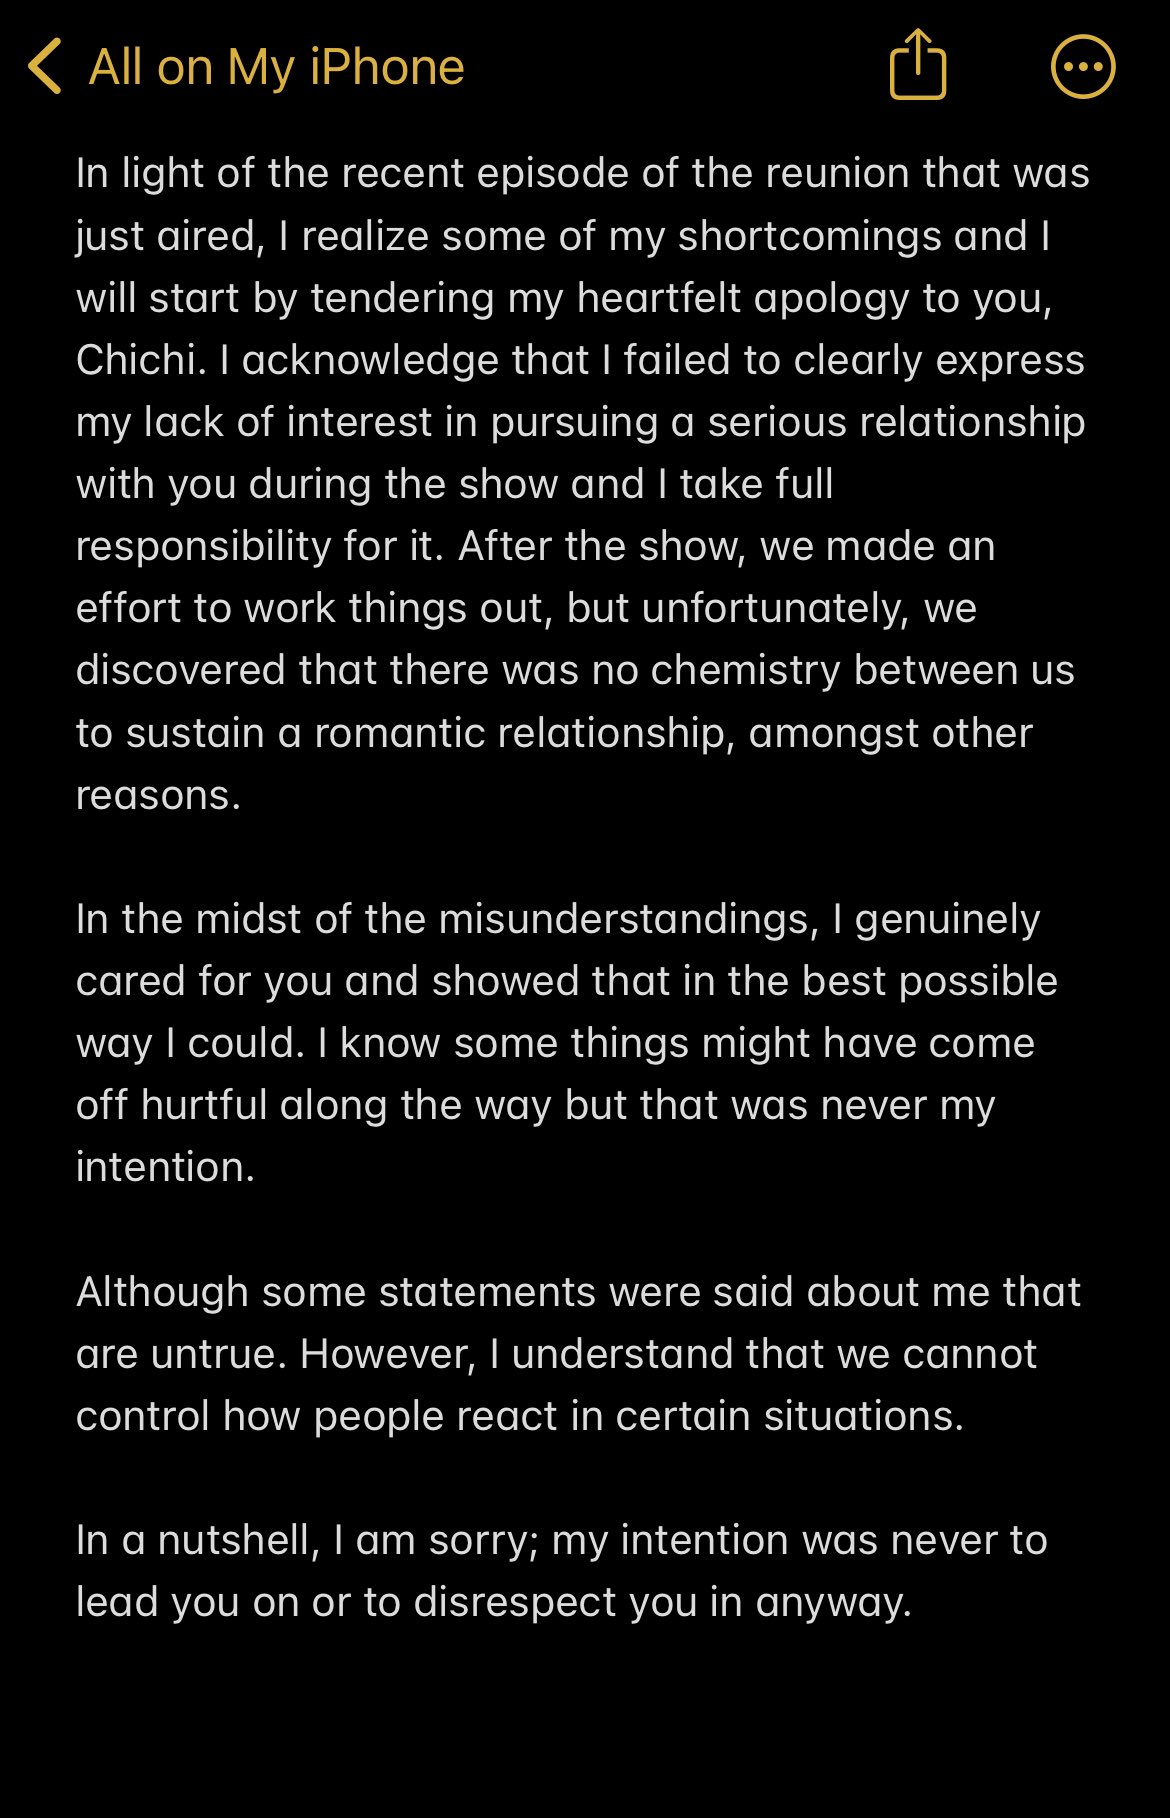 I am sorry, my intention was never to lead you on or disrespect you in any way”- BBNaija Deji Apologizes To Chichi 